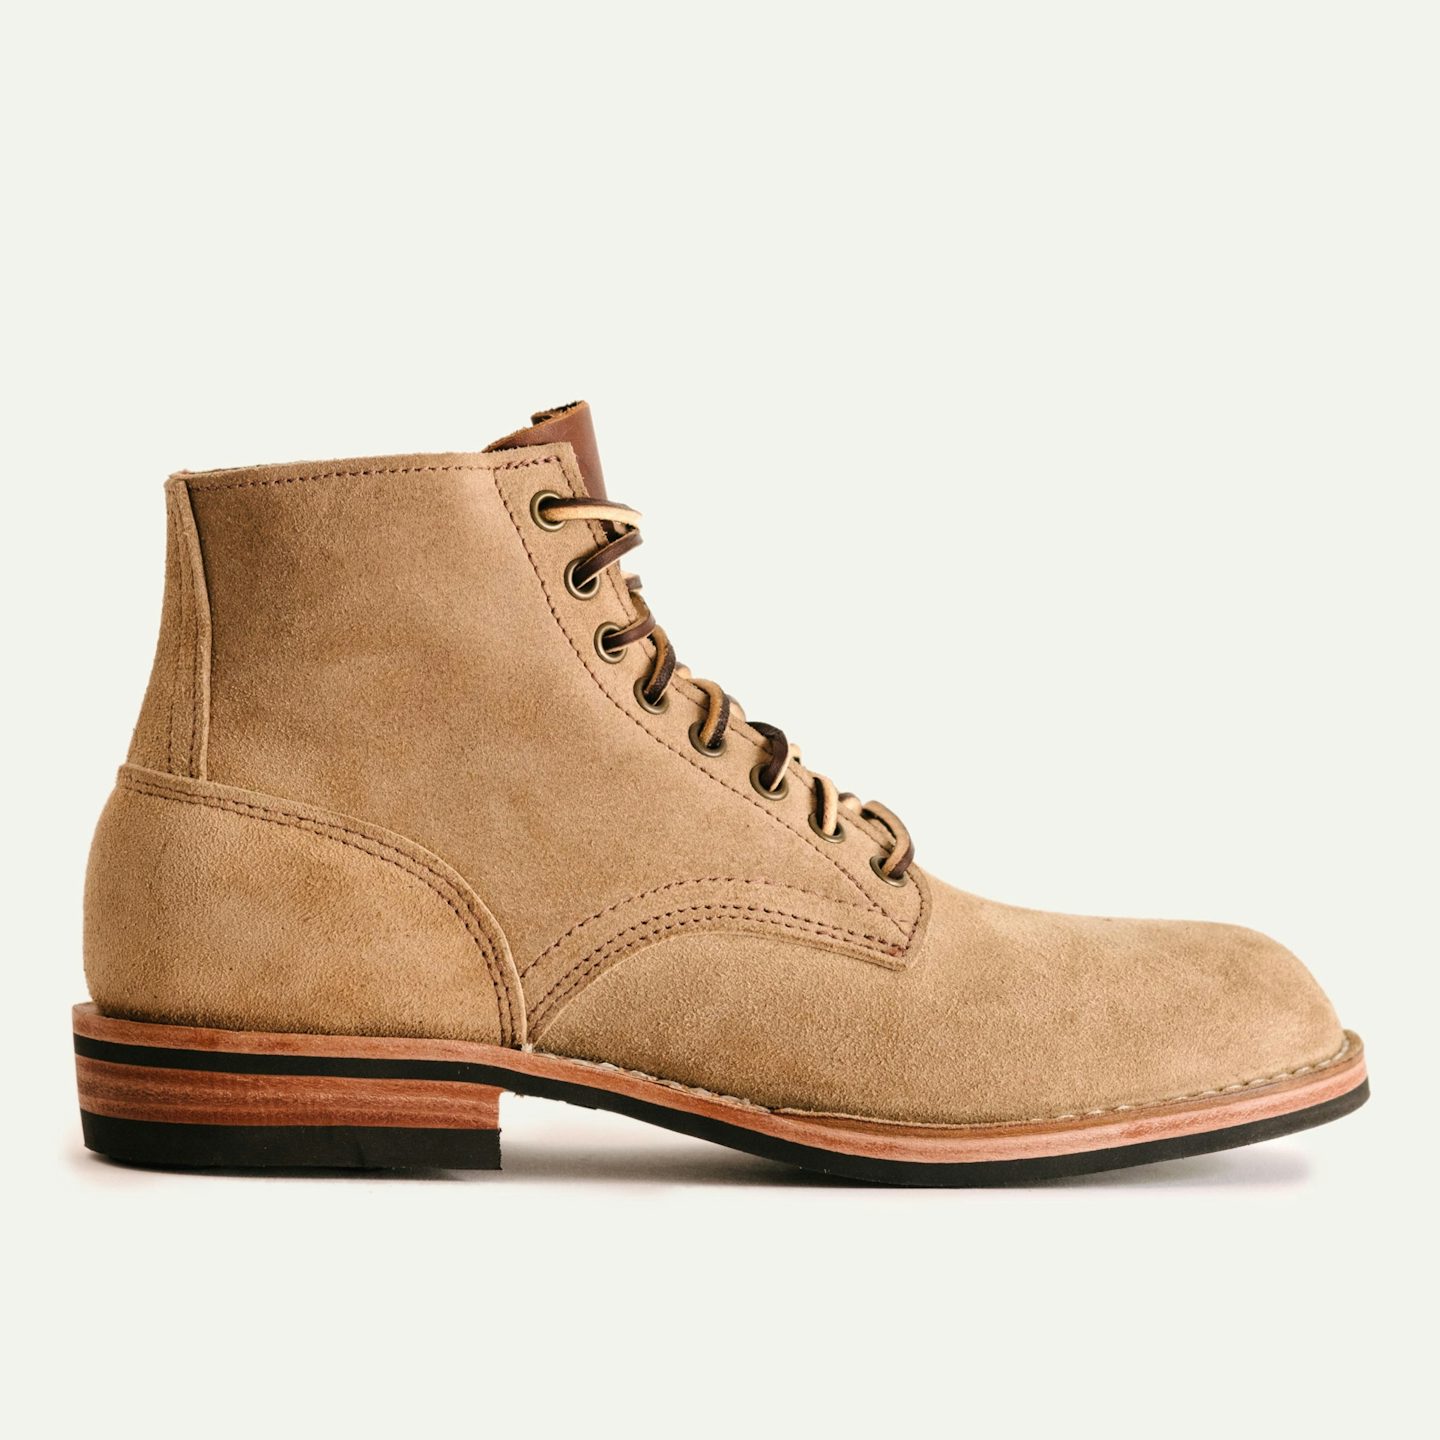 Storm Boot - Natural Chromexcel Roughout, Dainite Sole - Made in 